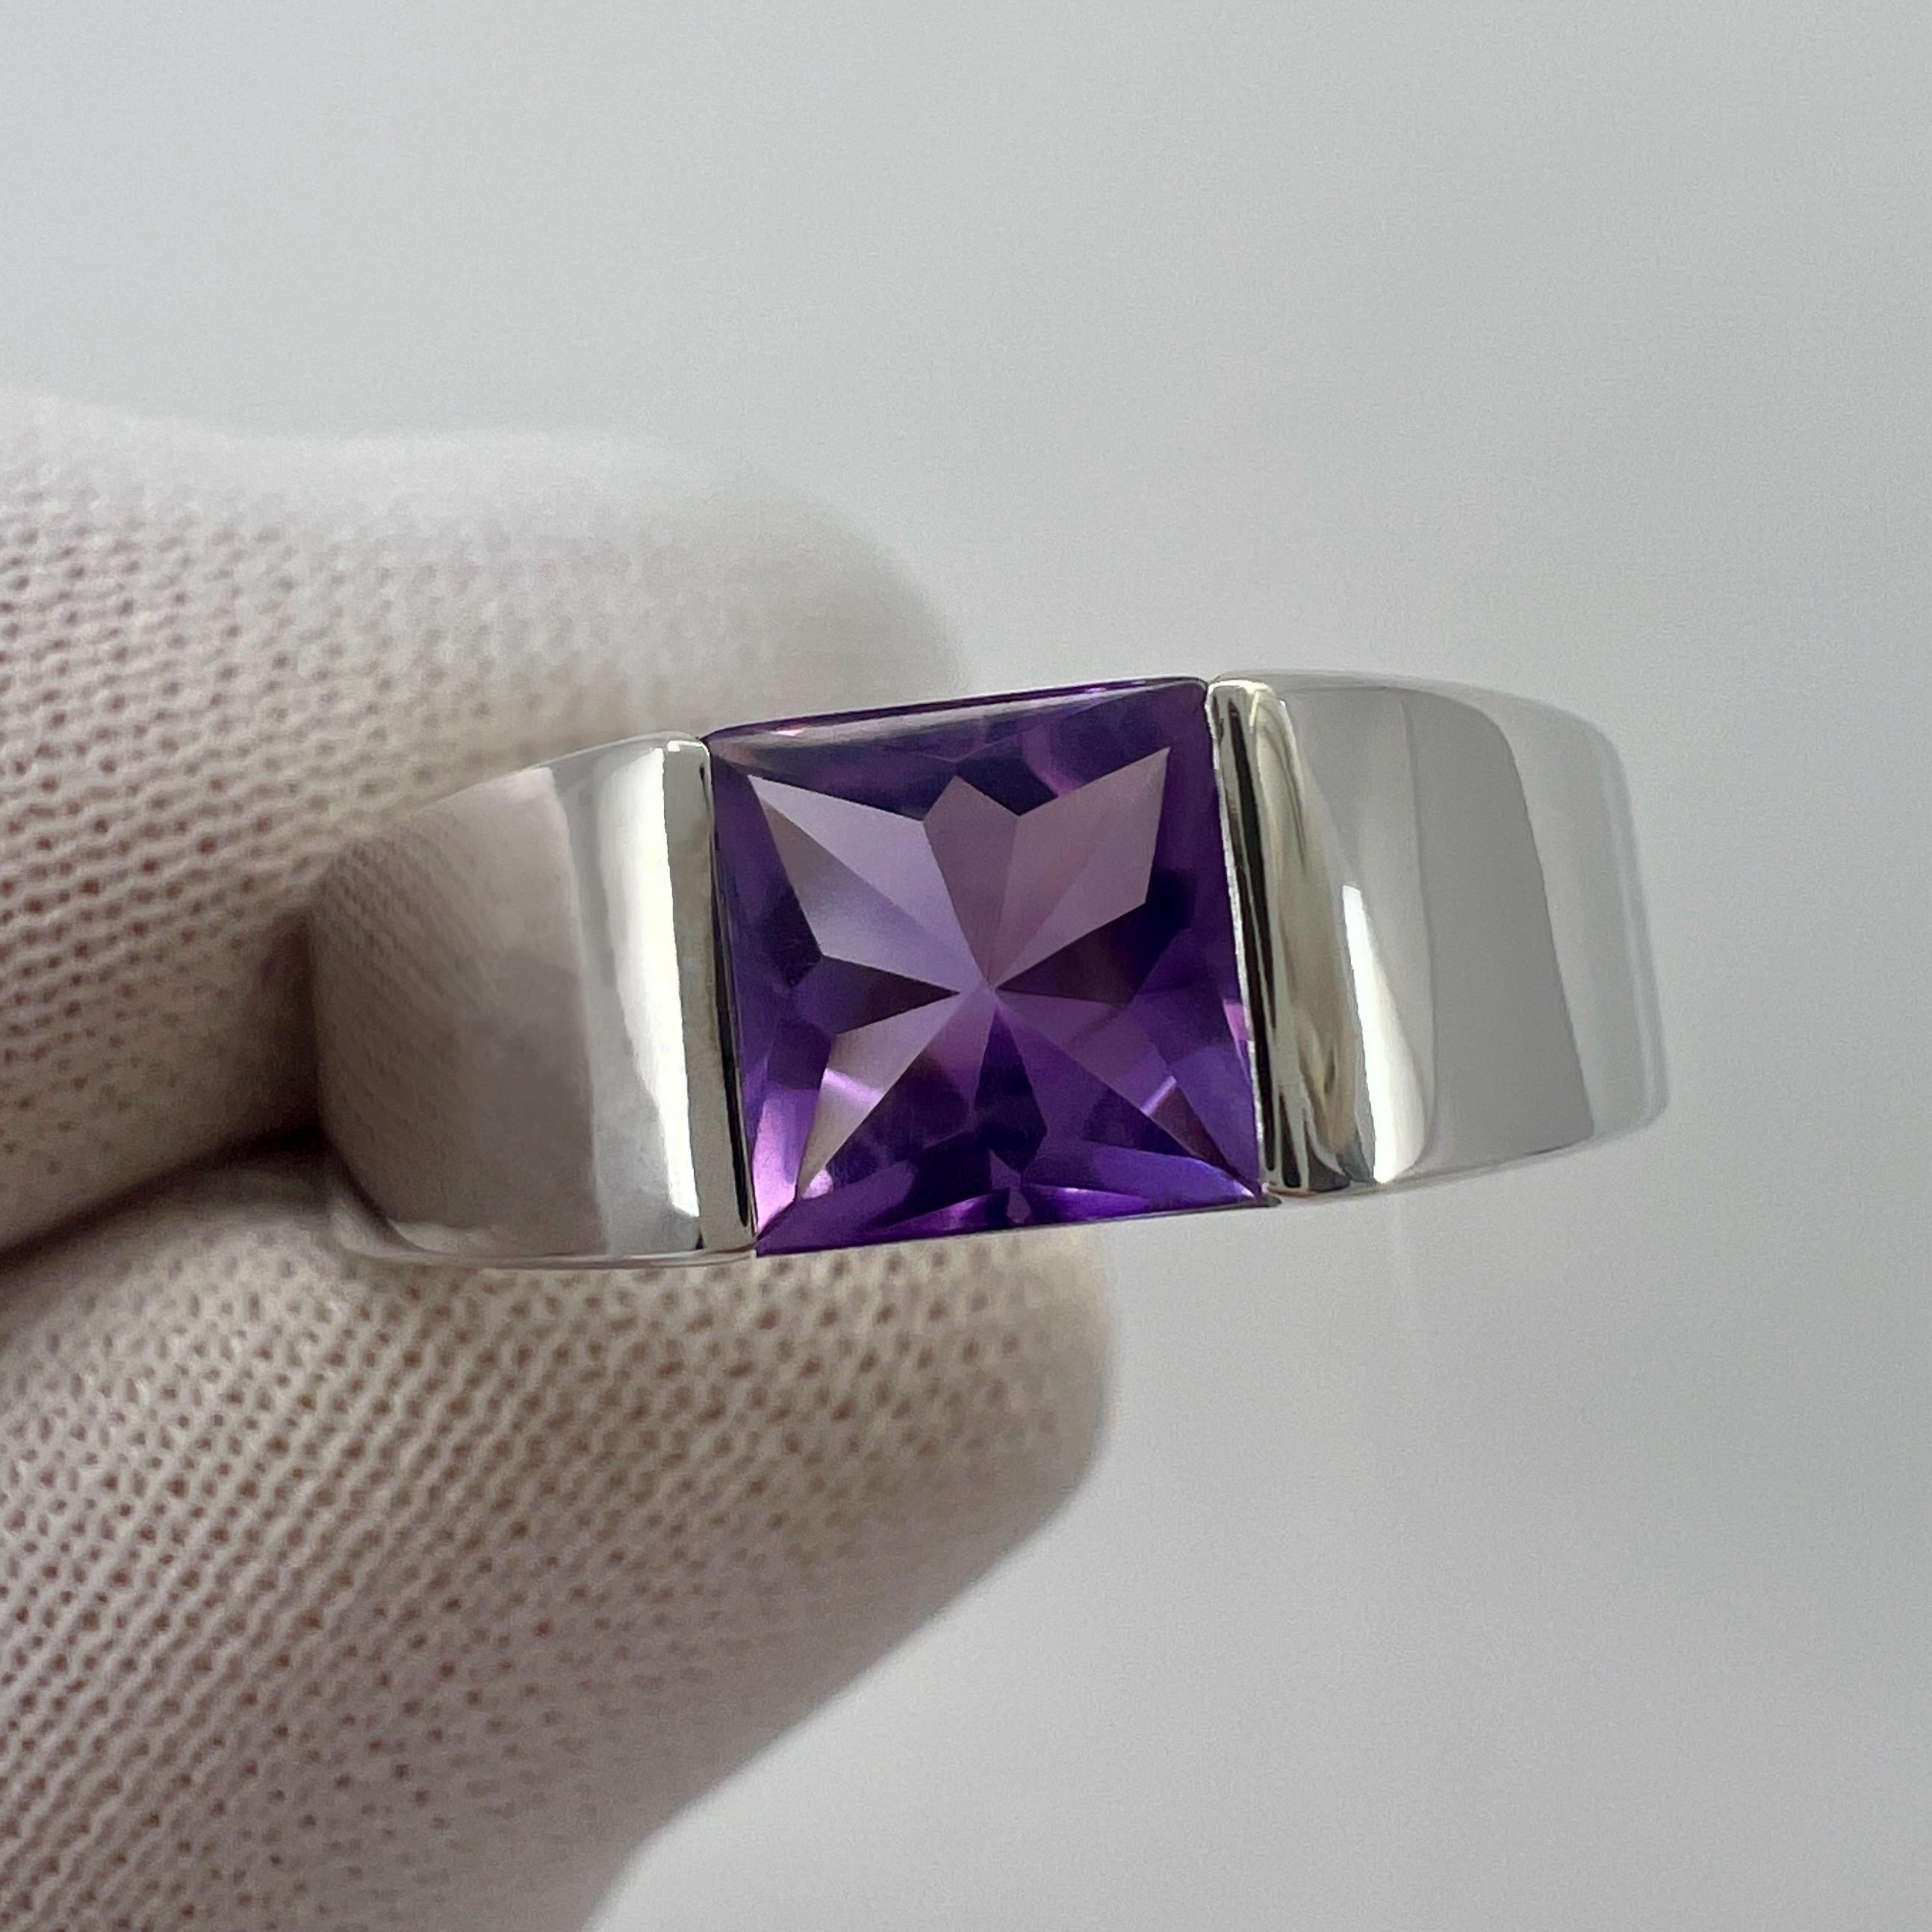 Vintage Cartier Purple Amethyst 18k White Gold Tank Band Ring.

Stunning white gold ring with a fine 6mm tension set deep purple amethyst. Fine jewellery houses like Cartier only use the finest of gemstones and this amethyst is no exception. 
A top